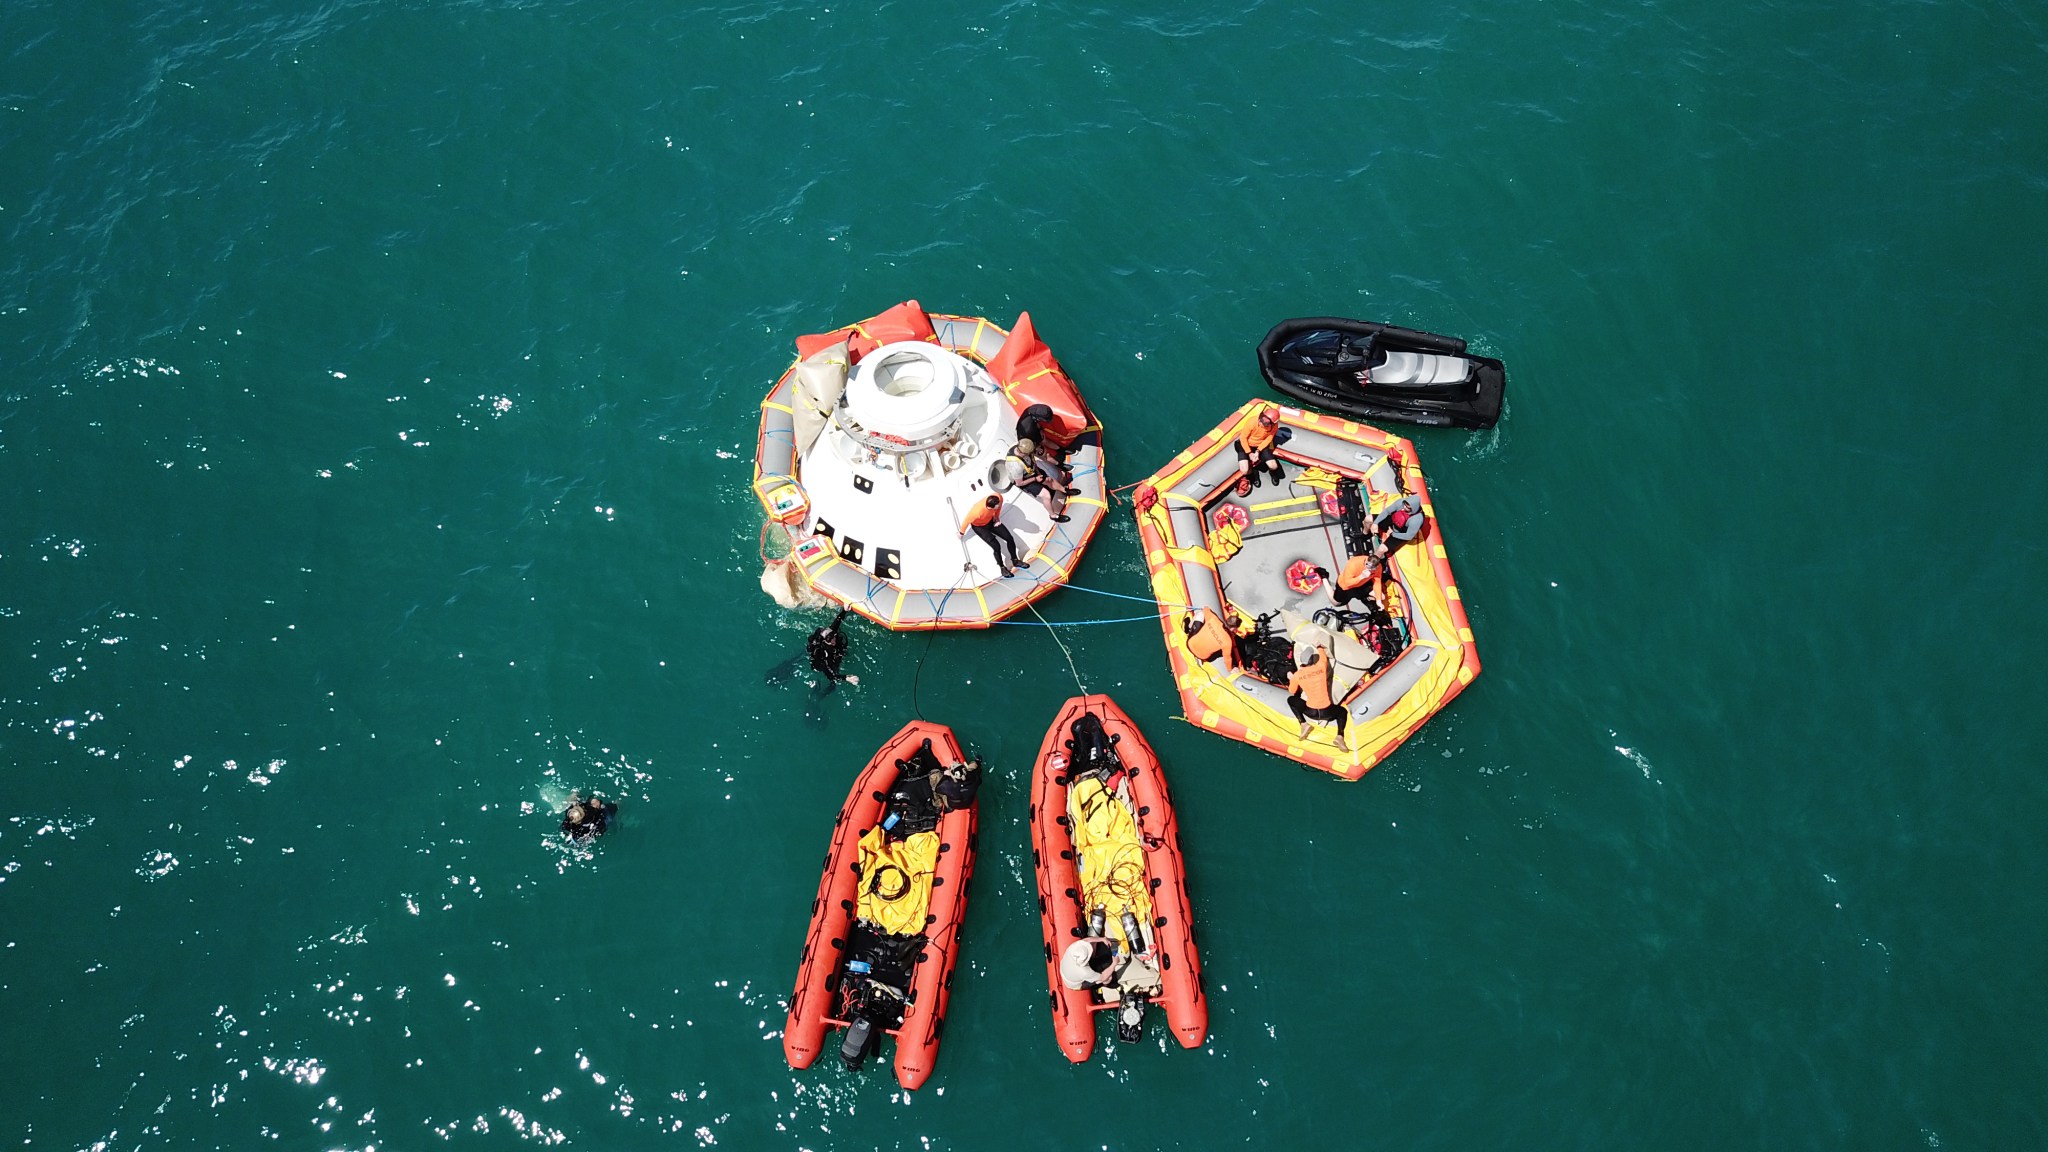 Rescue team members are using a Boeing CST-100 Starliner training capsule to rehearse a search and rescue training exercise.